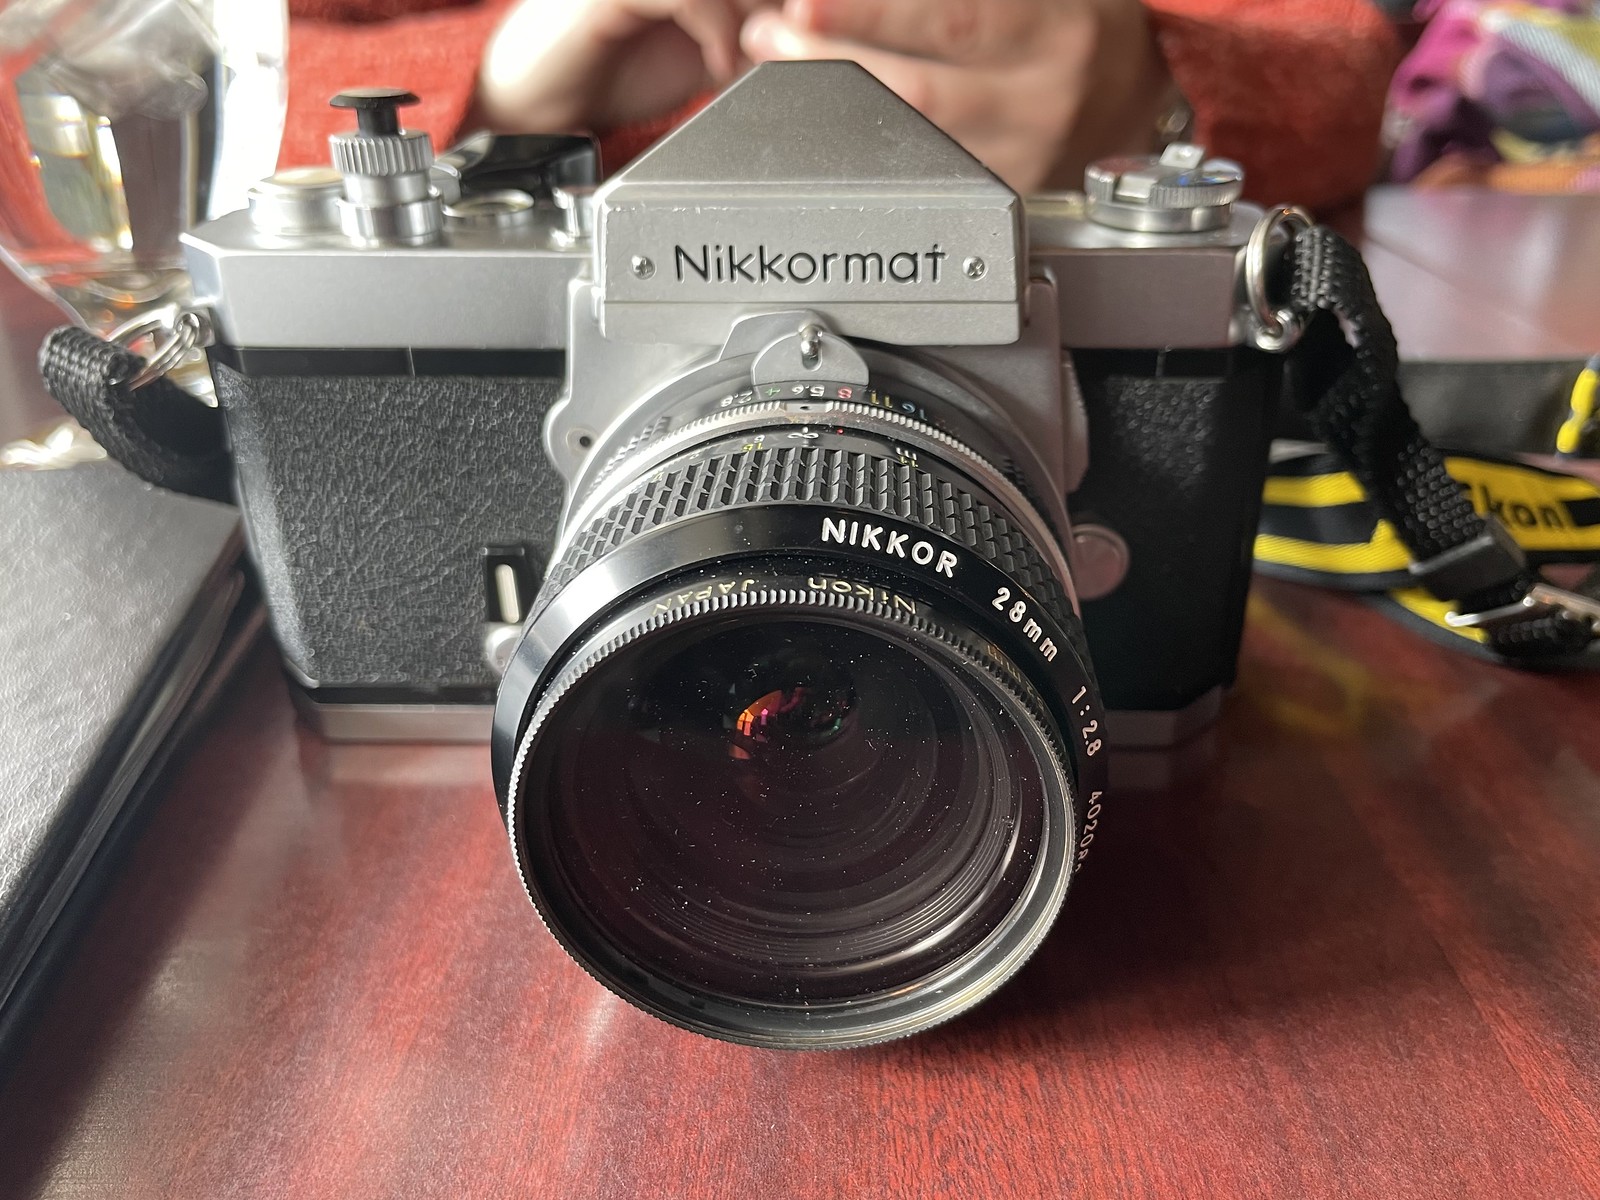 Nikkormat FTn with Nikkor Pre Ai 28 F2.8 lens.